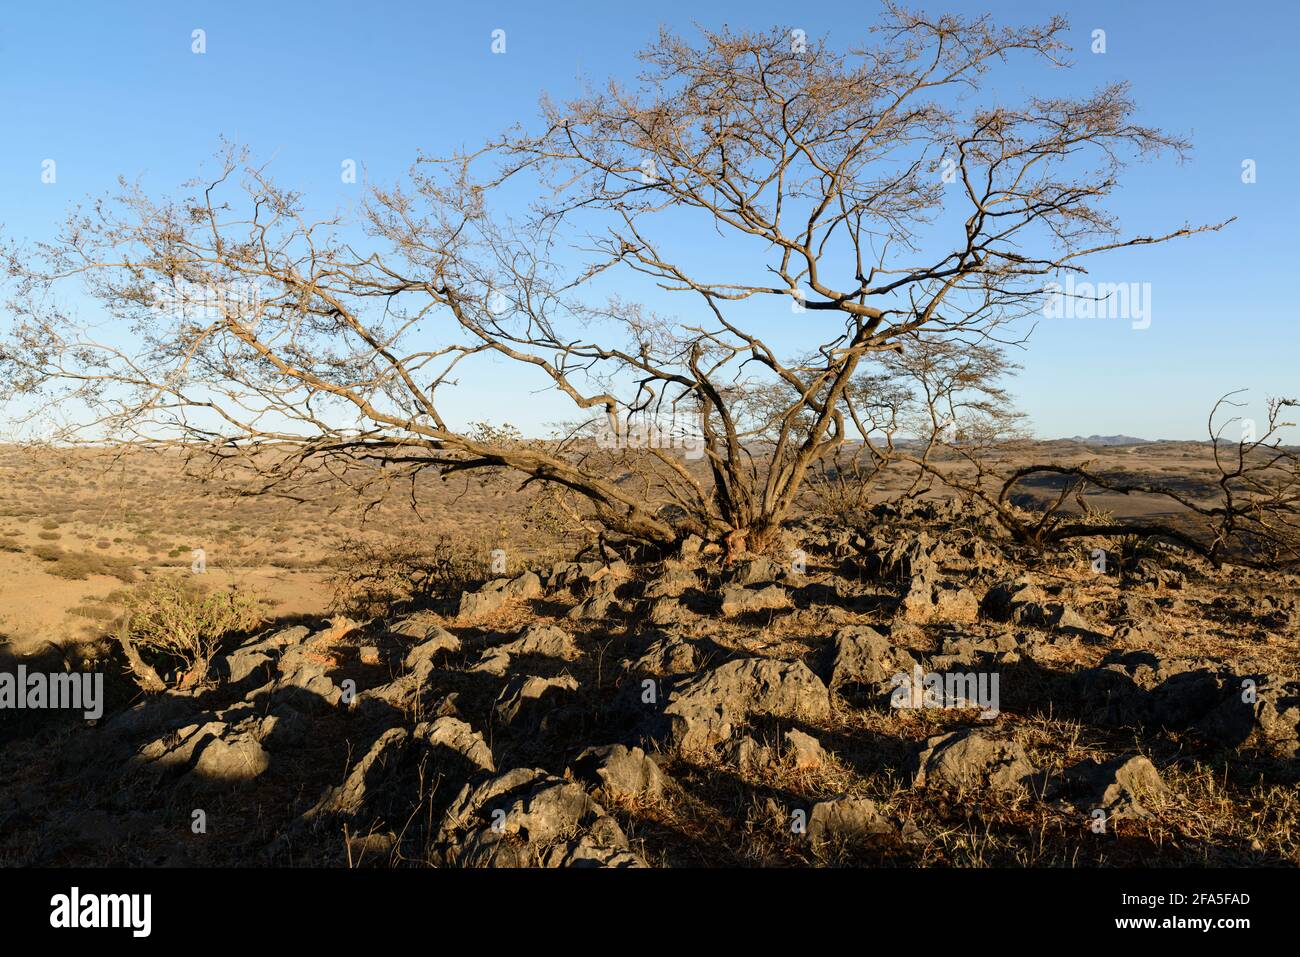 A barren tree in the dry season growing between the rocks, Dhofar Governorate, Oman. Stock Photo